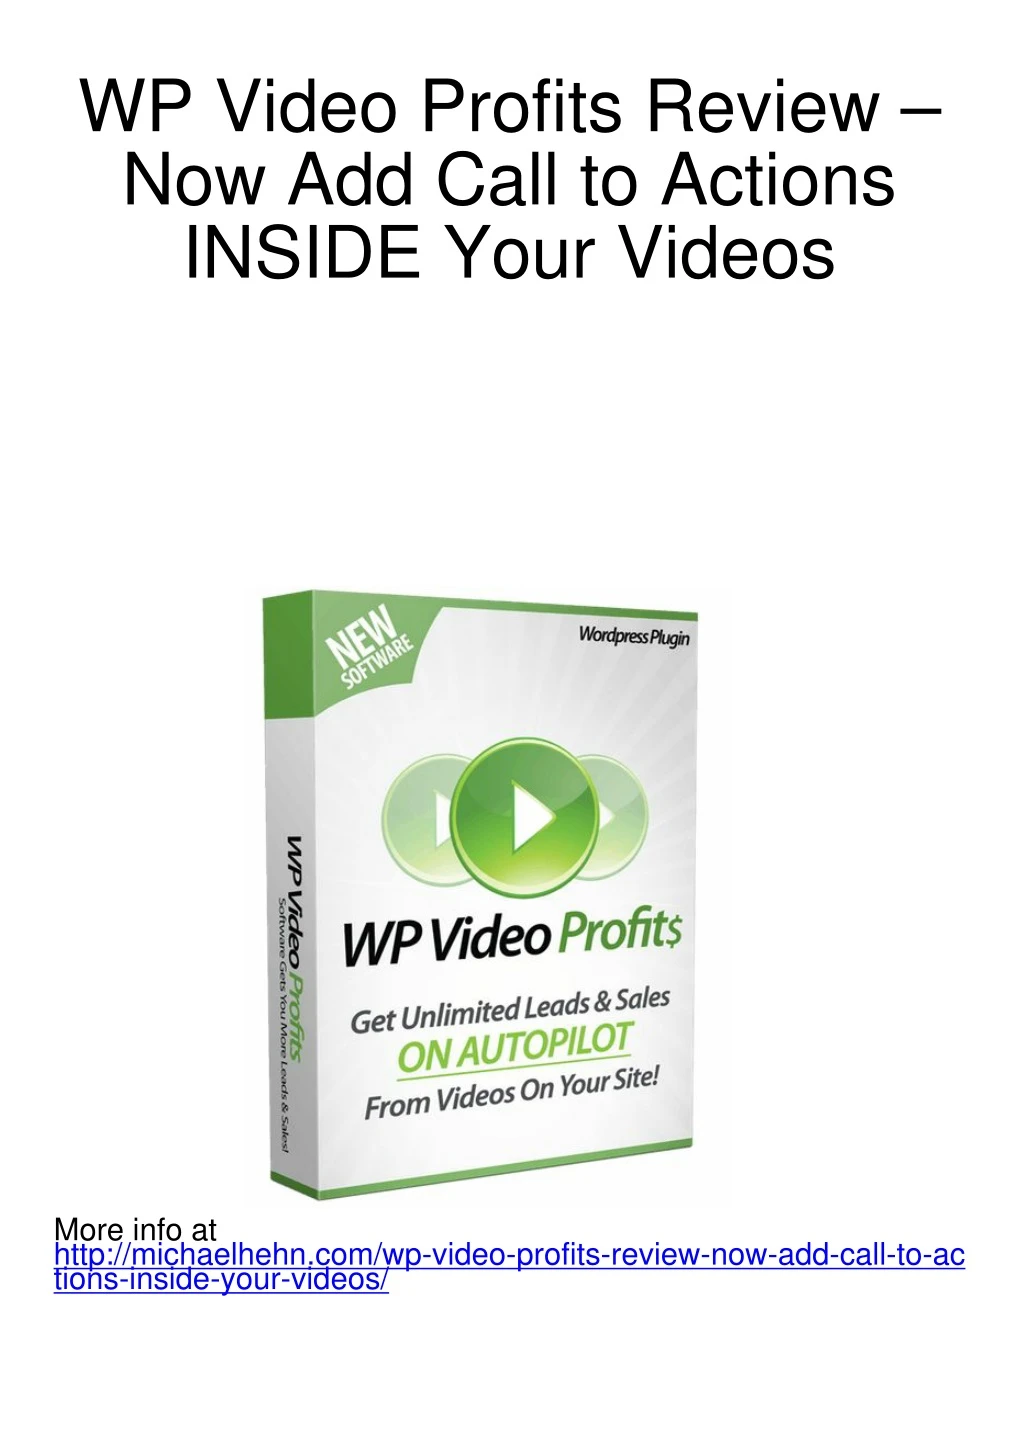 wp video profits review now add call to actions